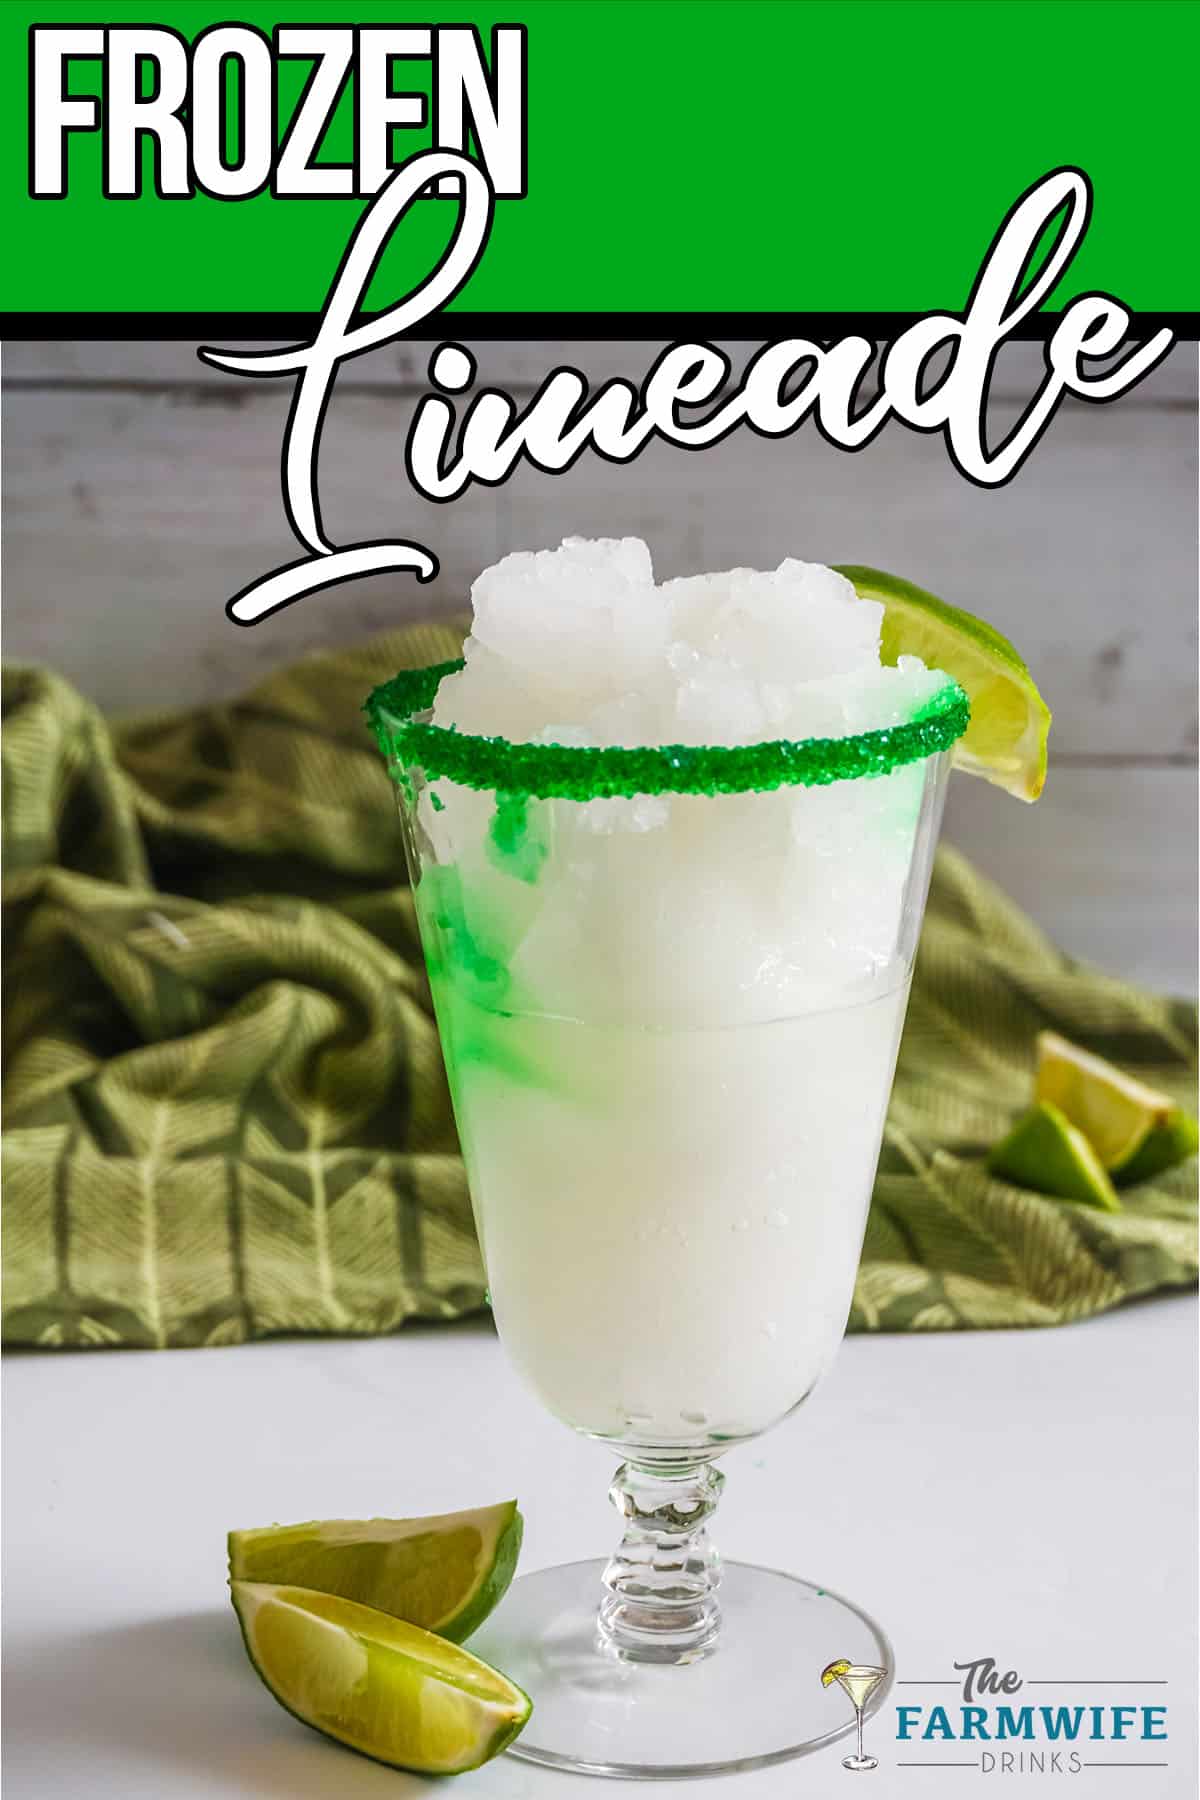 Green Frozen Limeade with sliced Limes on rim.